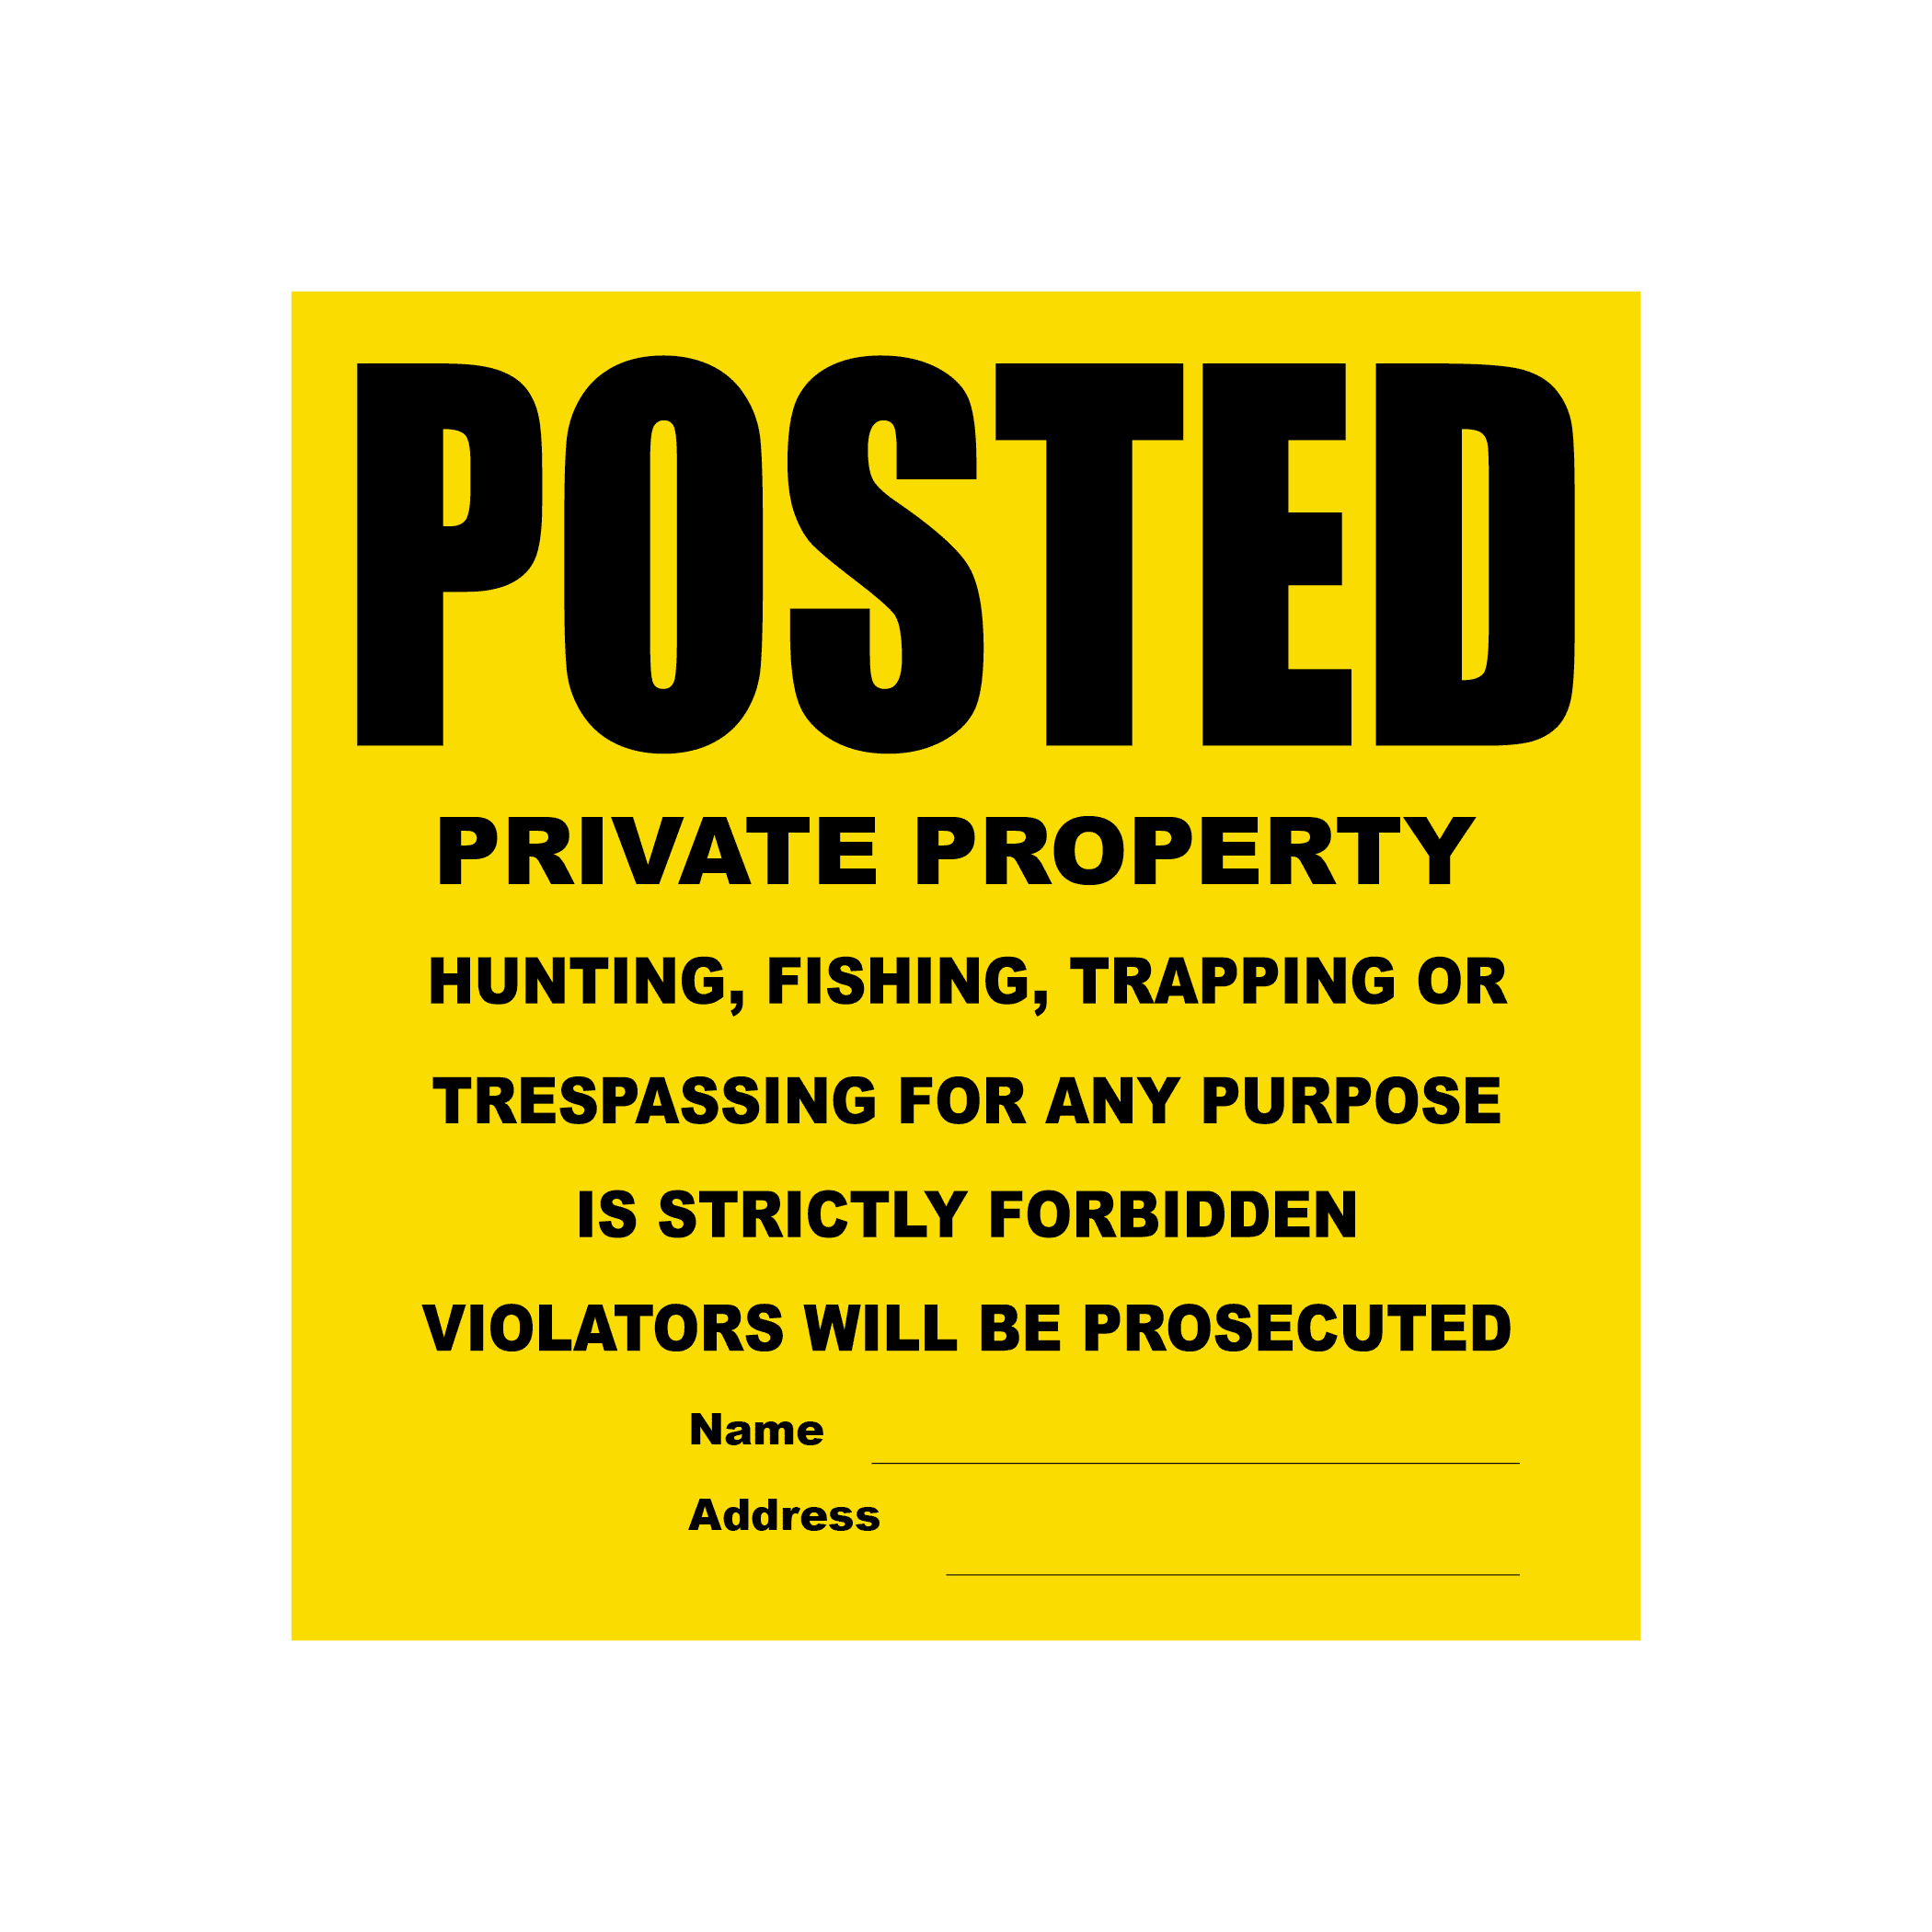 NO TRESPASSING  WARNING 279 KEEP OUT METAL SIGN 11 x 6"  PRIVATE LAND